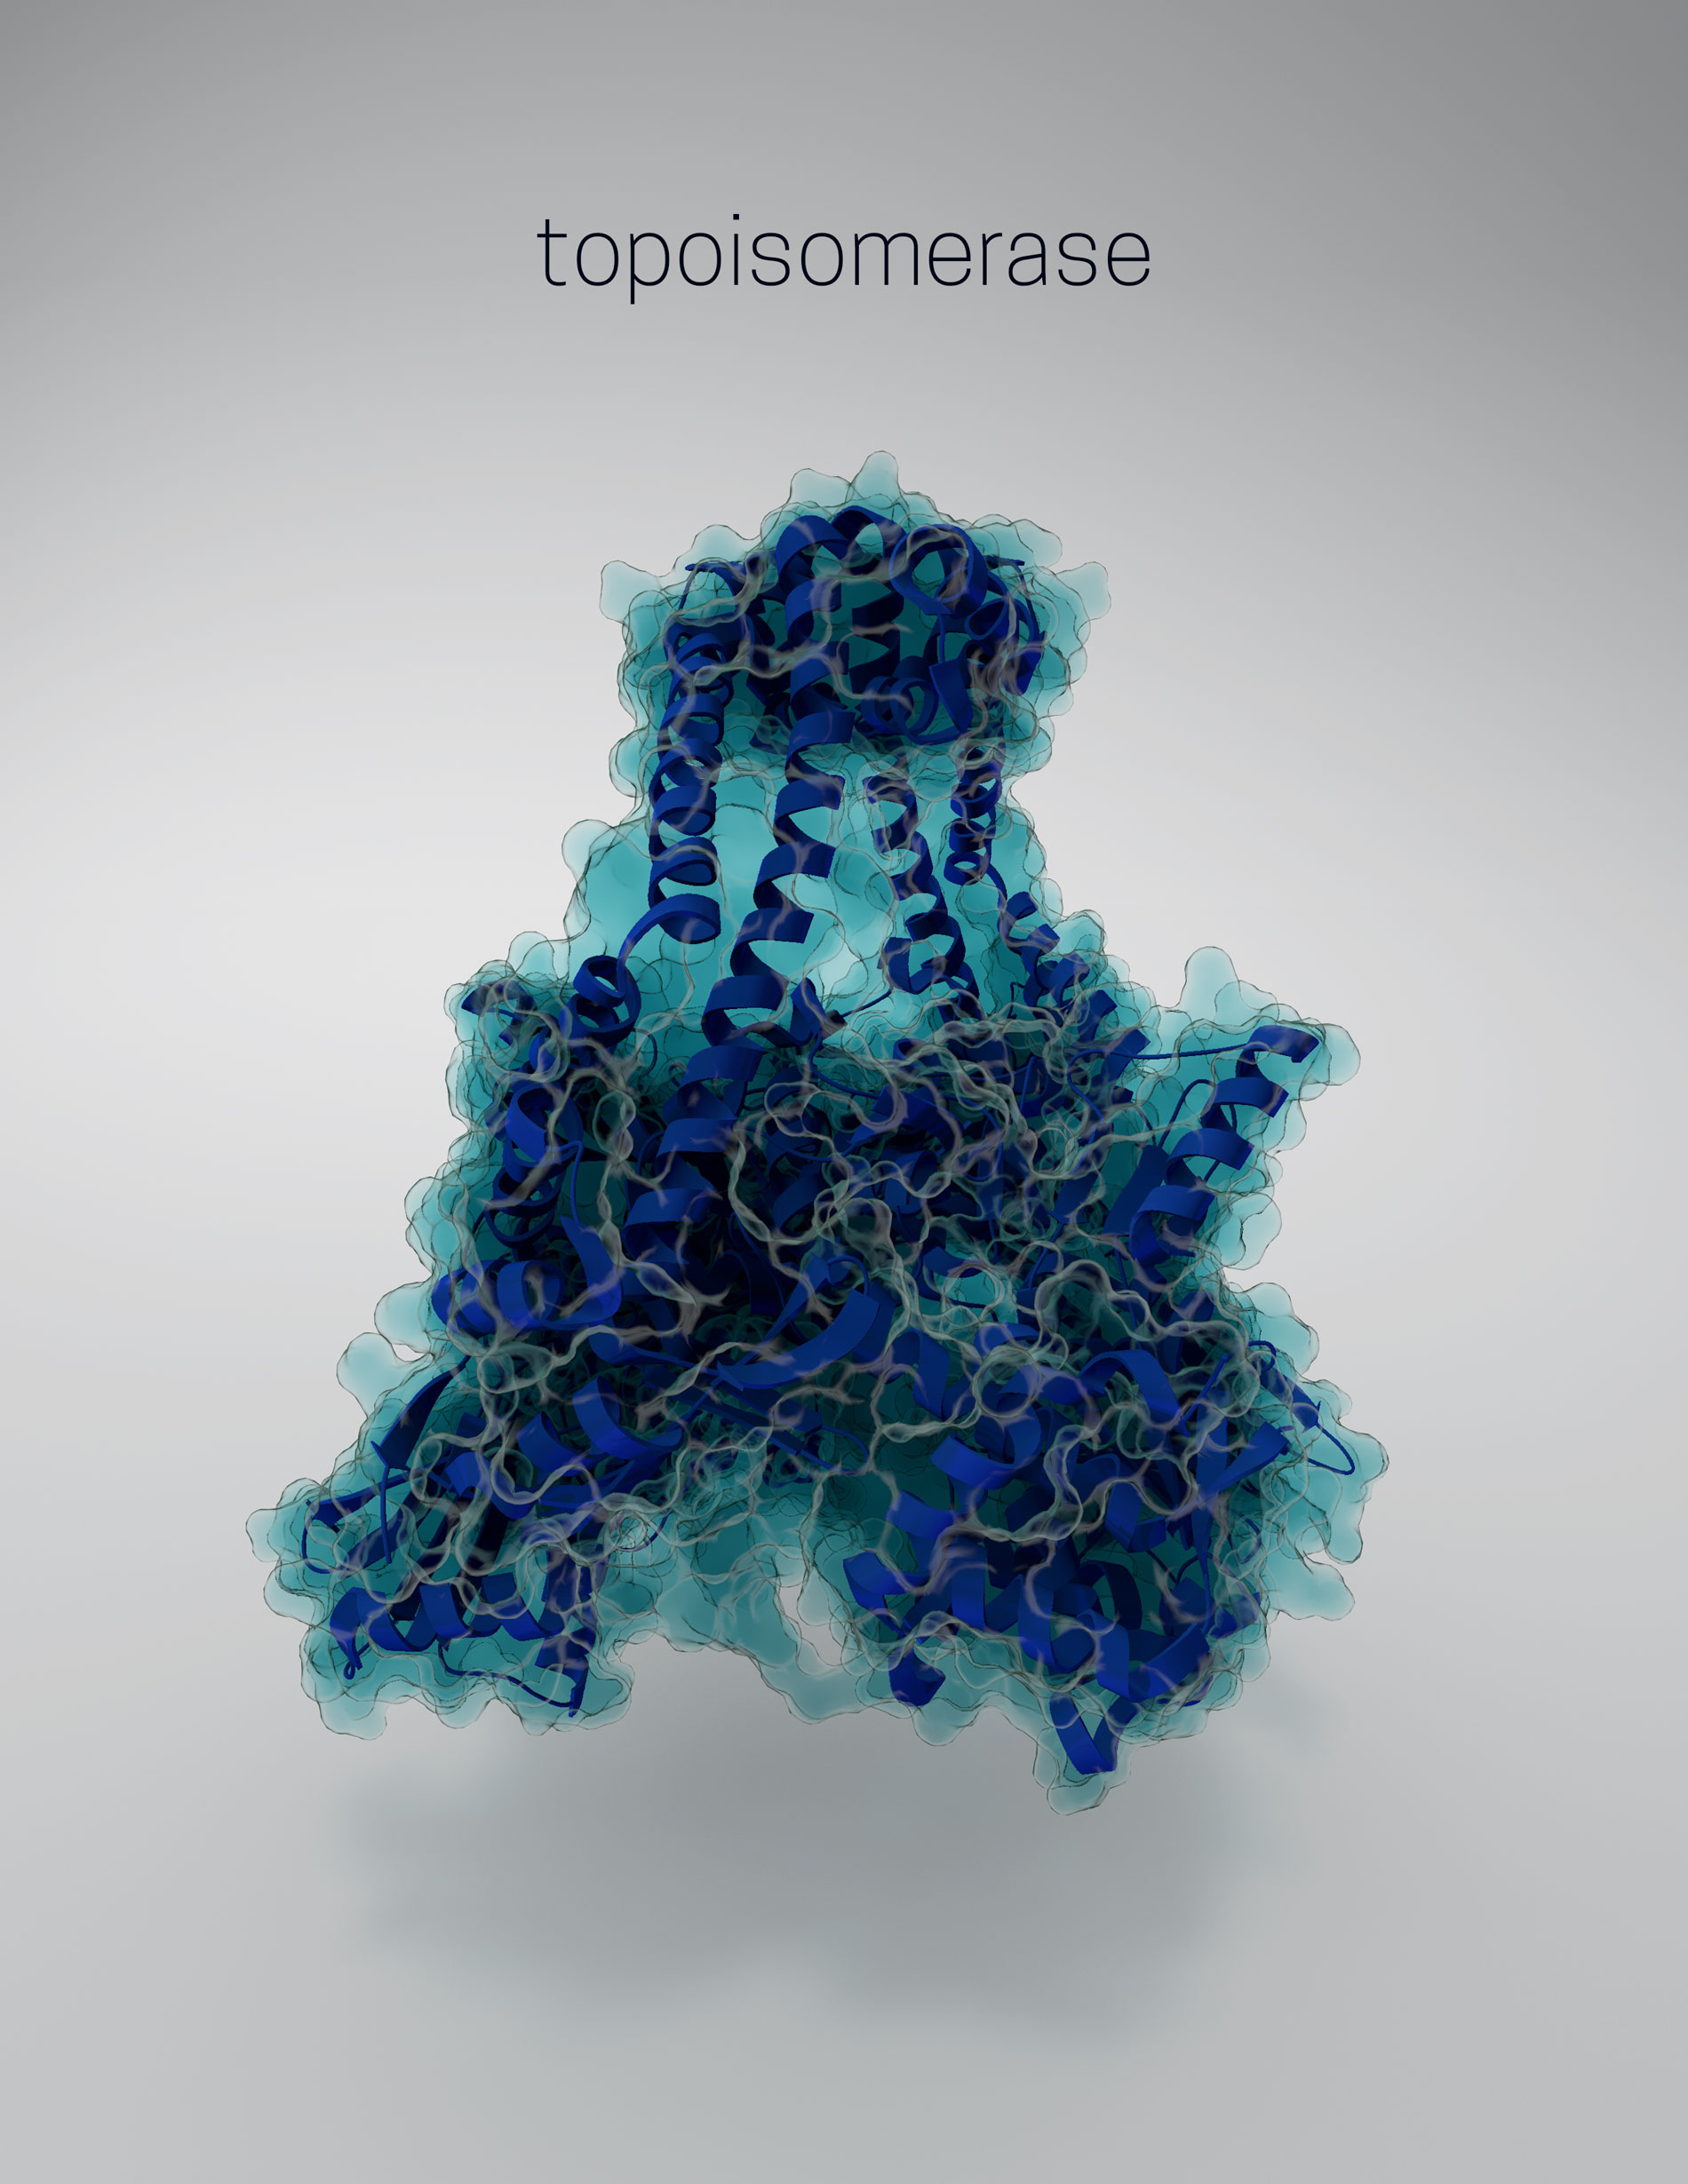 3D rendering of topoisomerase